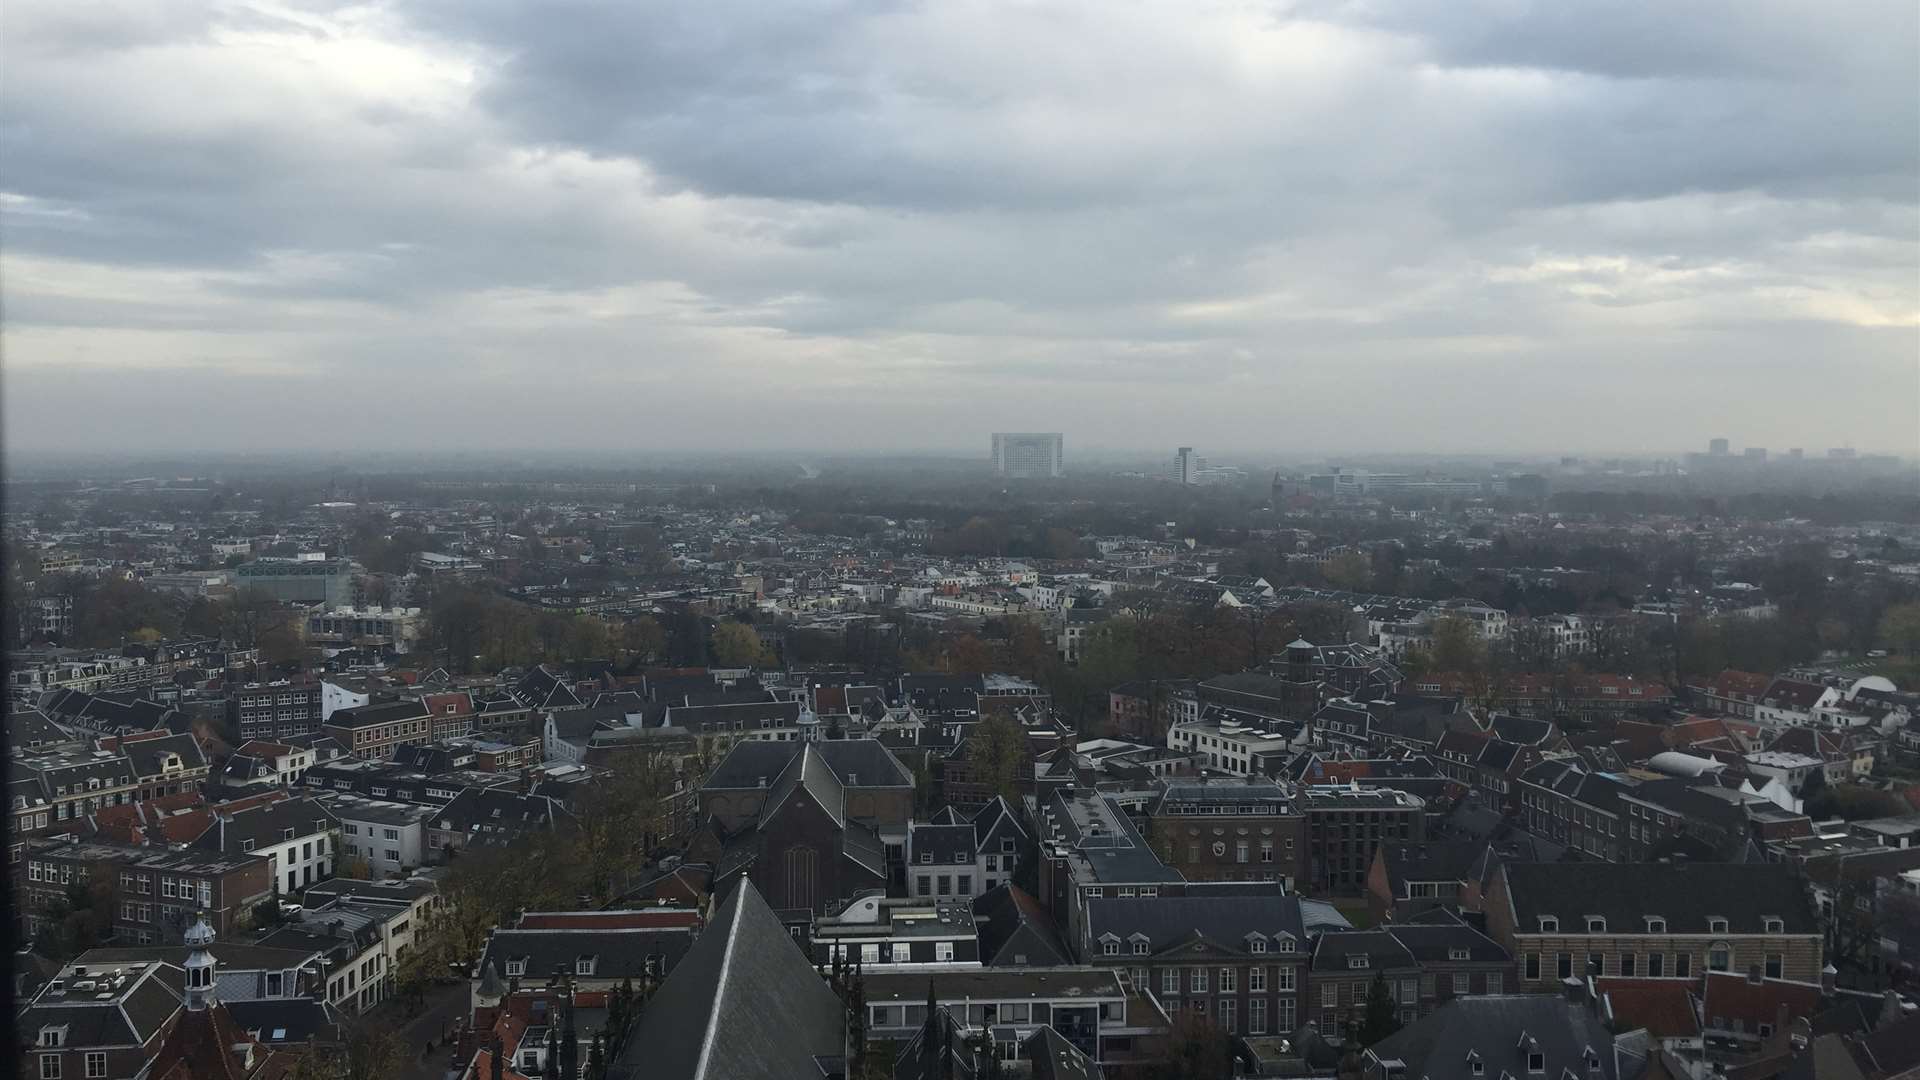 Views over Utrcht from the top of the Dom Tower